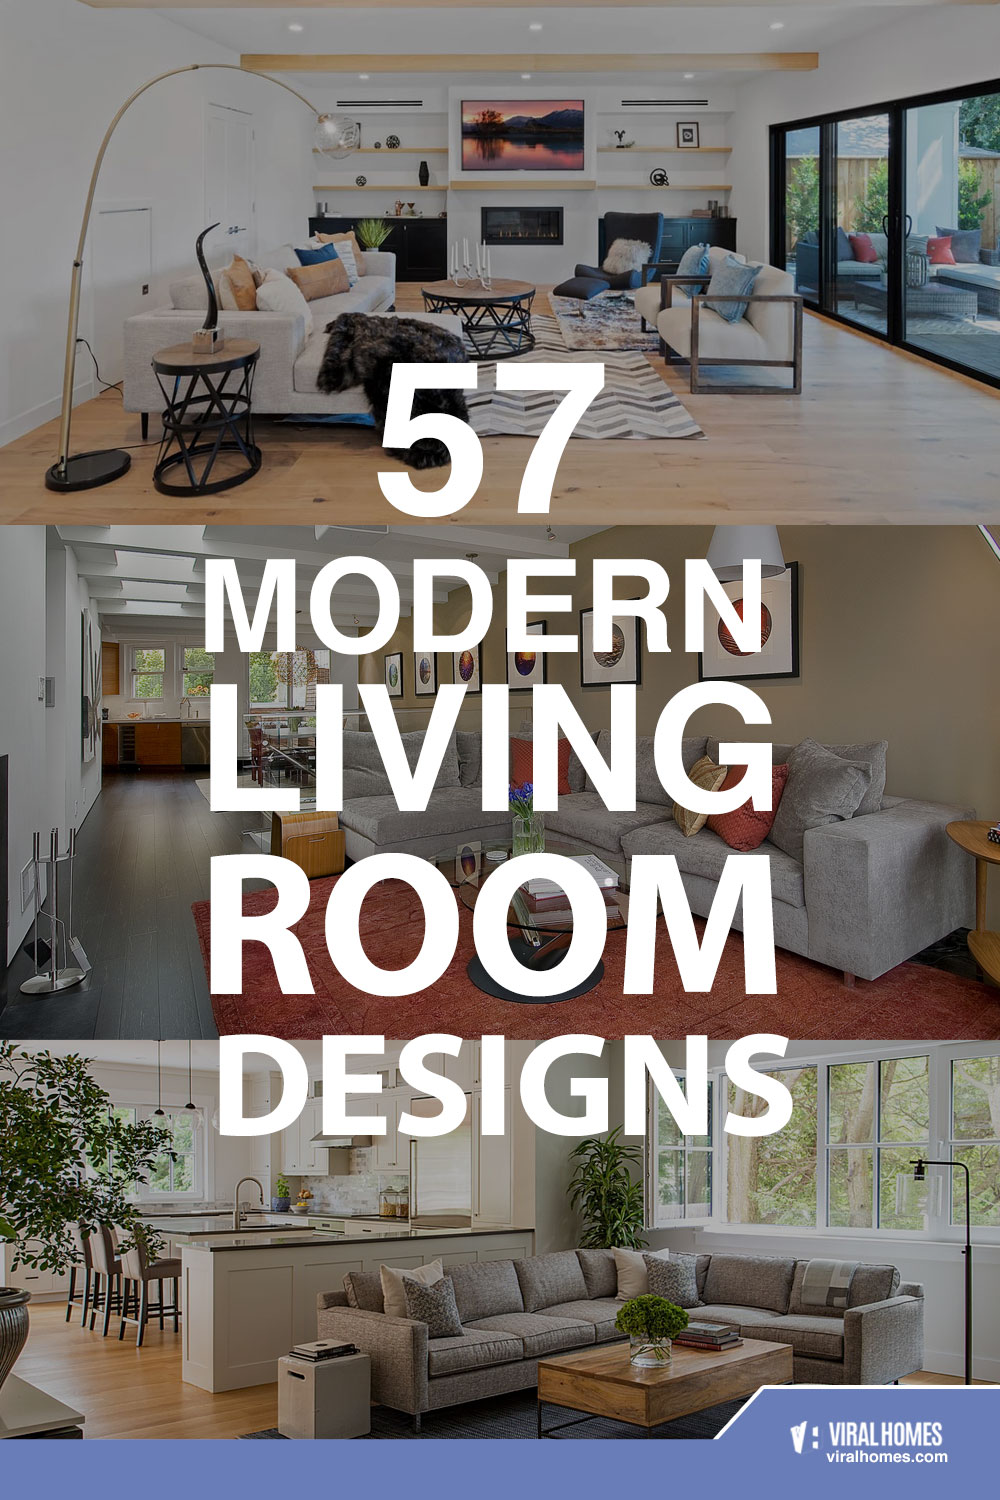 Modern Living Room Designs for the Modern Home Owners